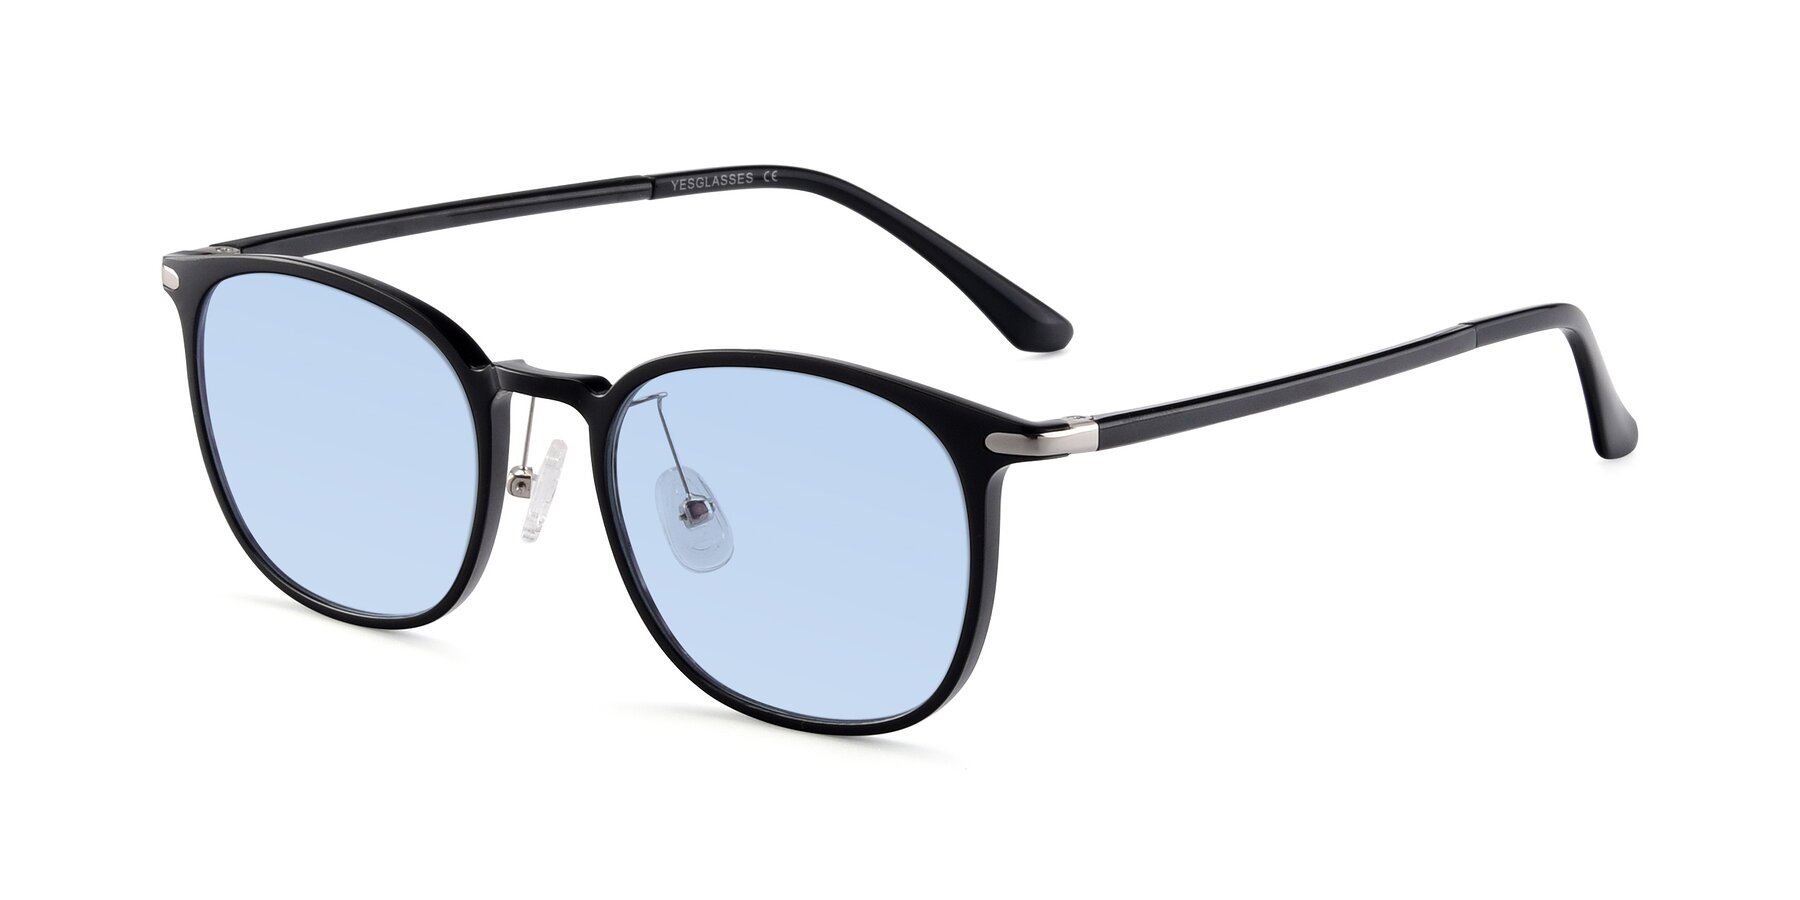 Angle of Melinda in Black with Light Blue Tinted Lenses